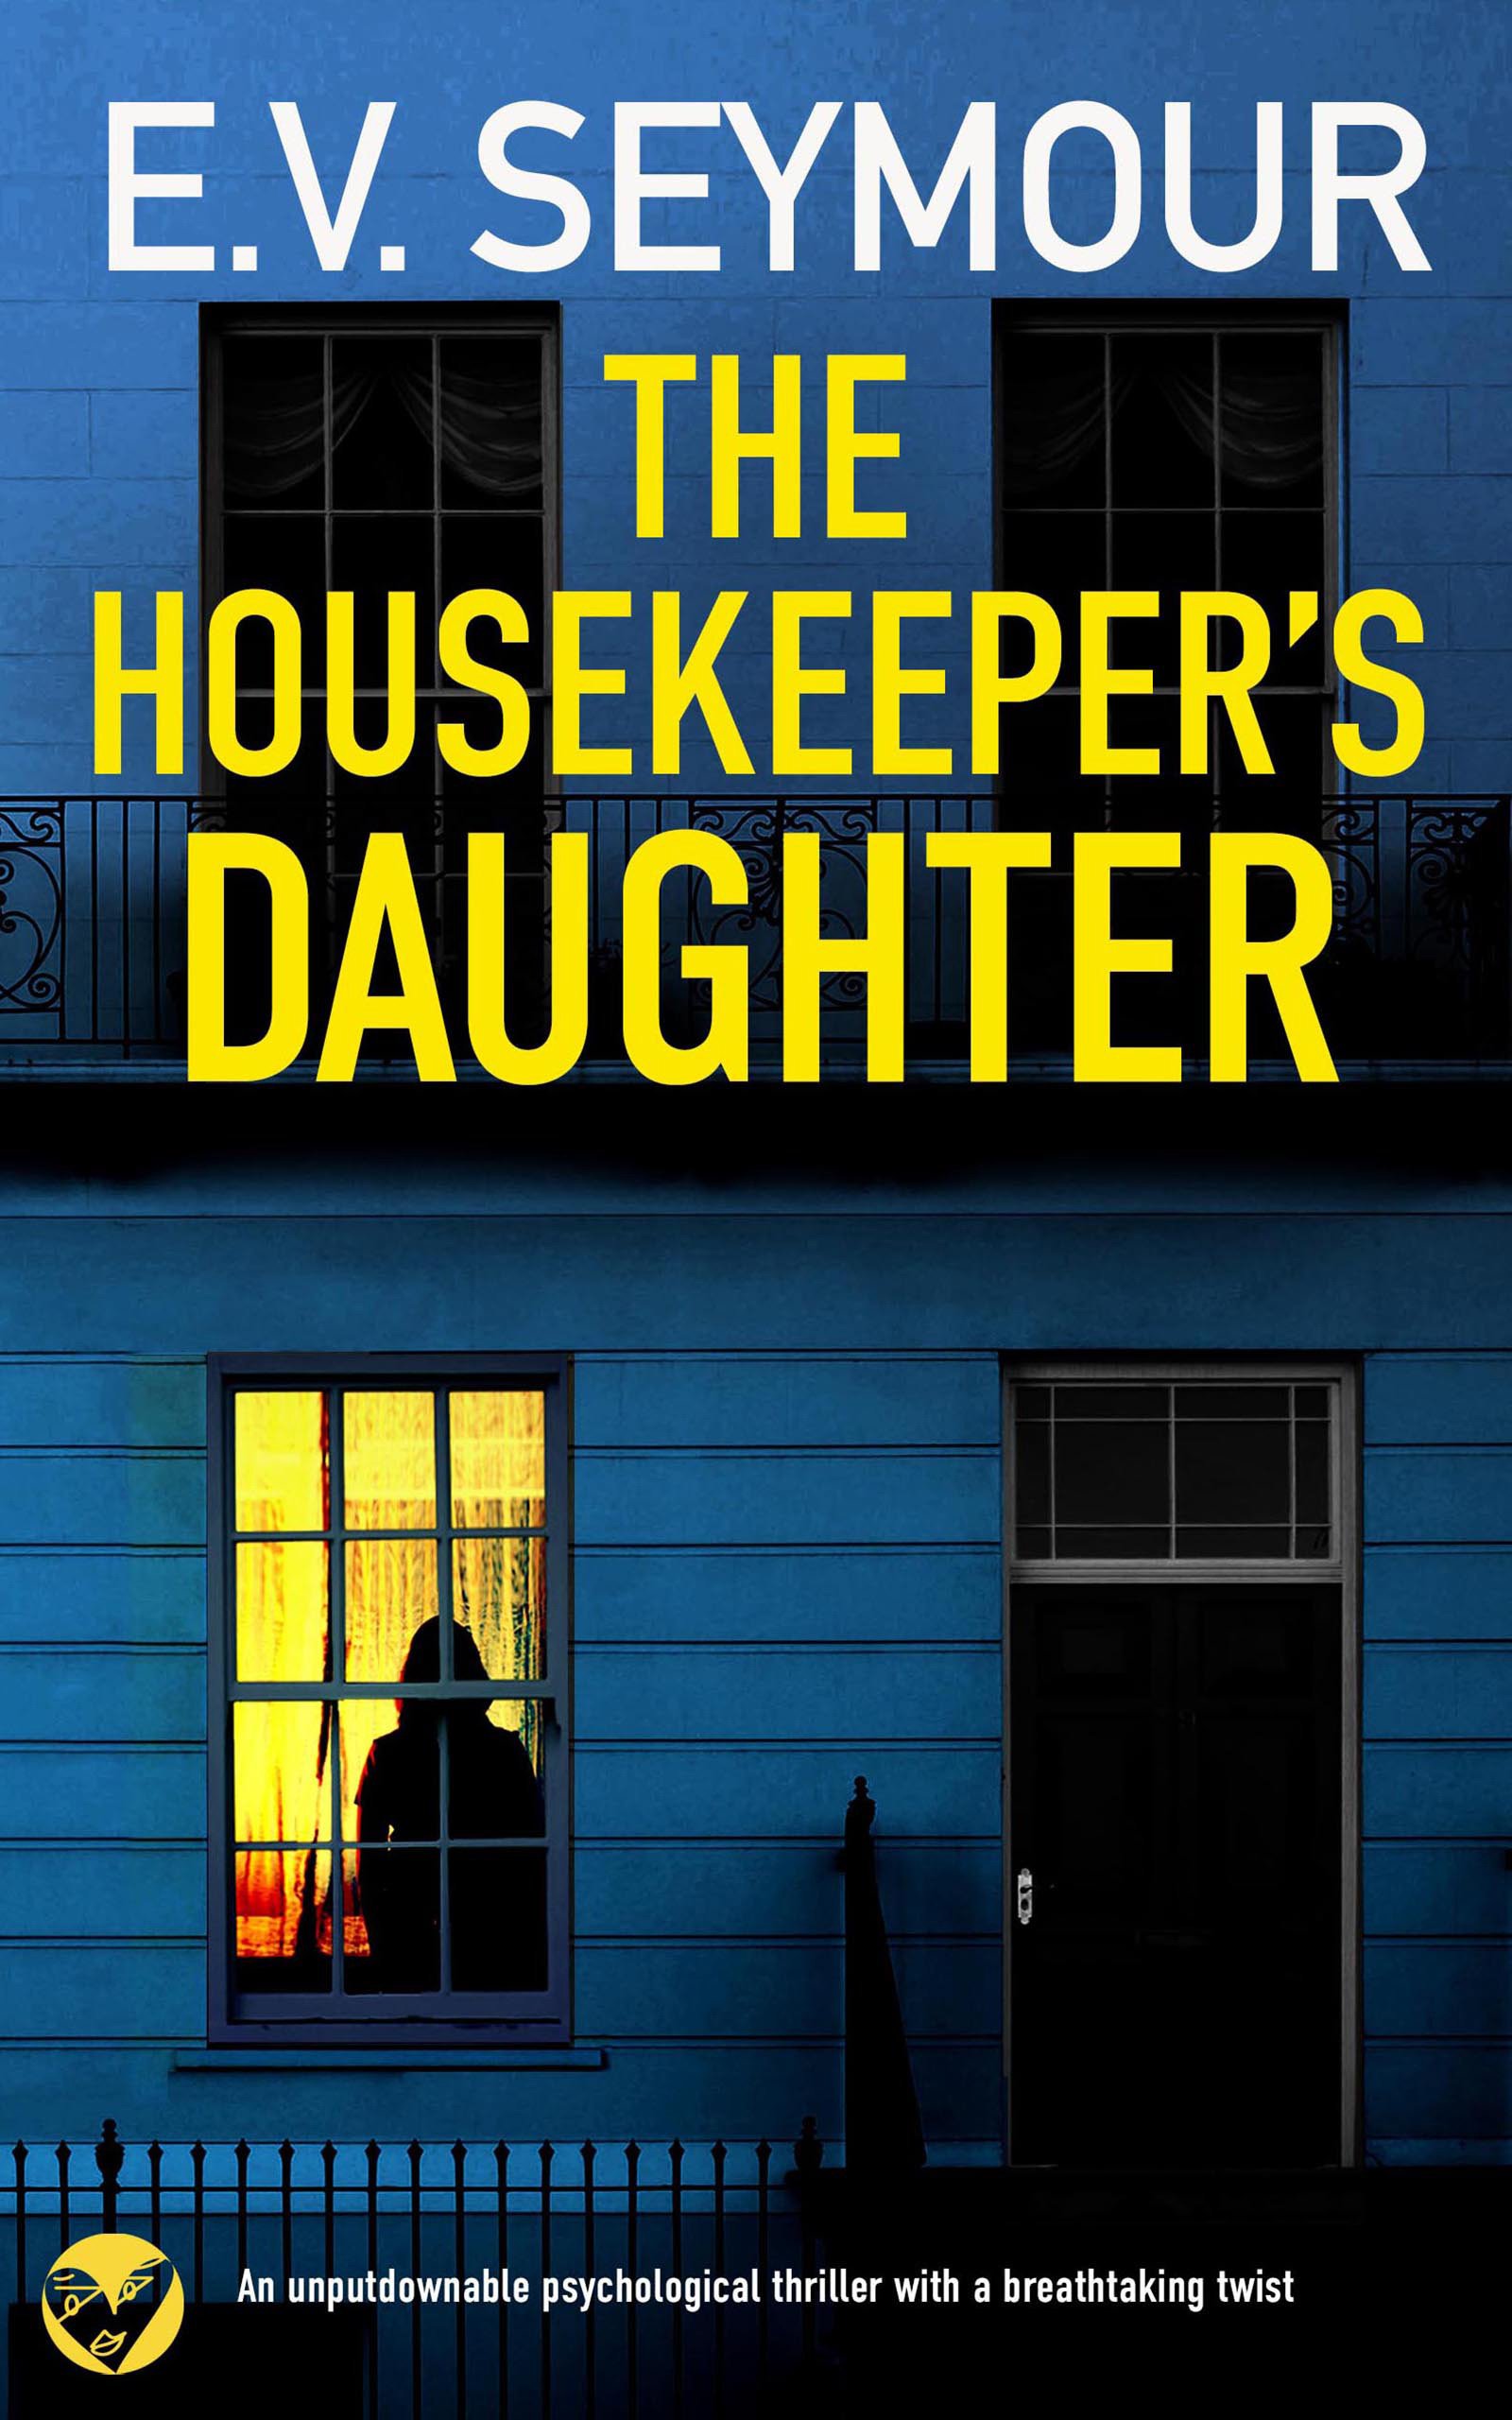 THE HOUSEKEEPER'S DAUGHTER 562k cover publish.jpg